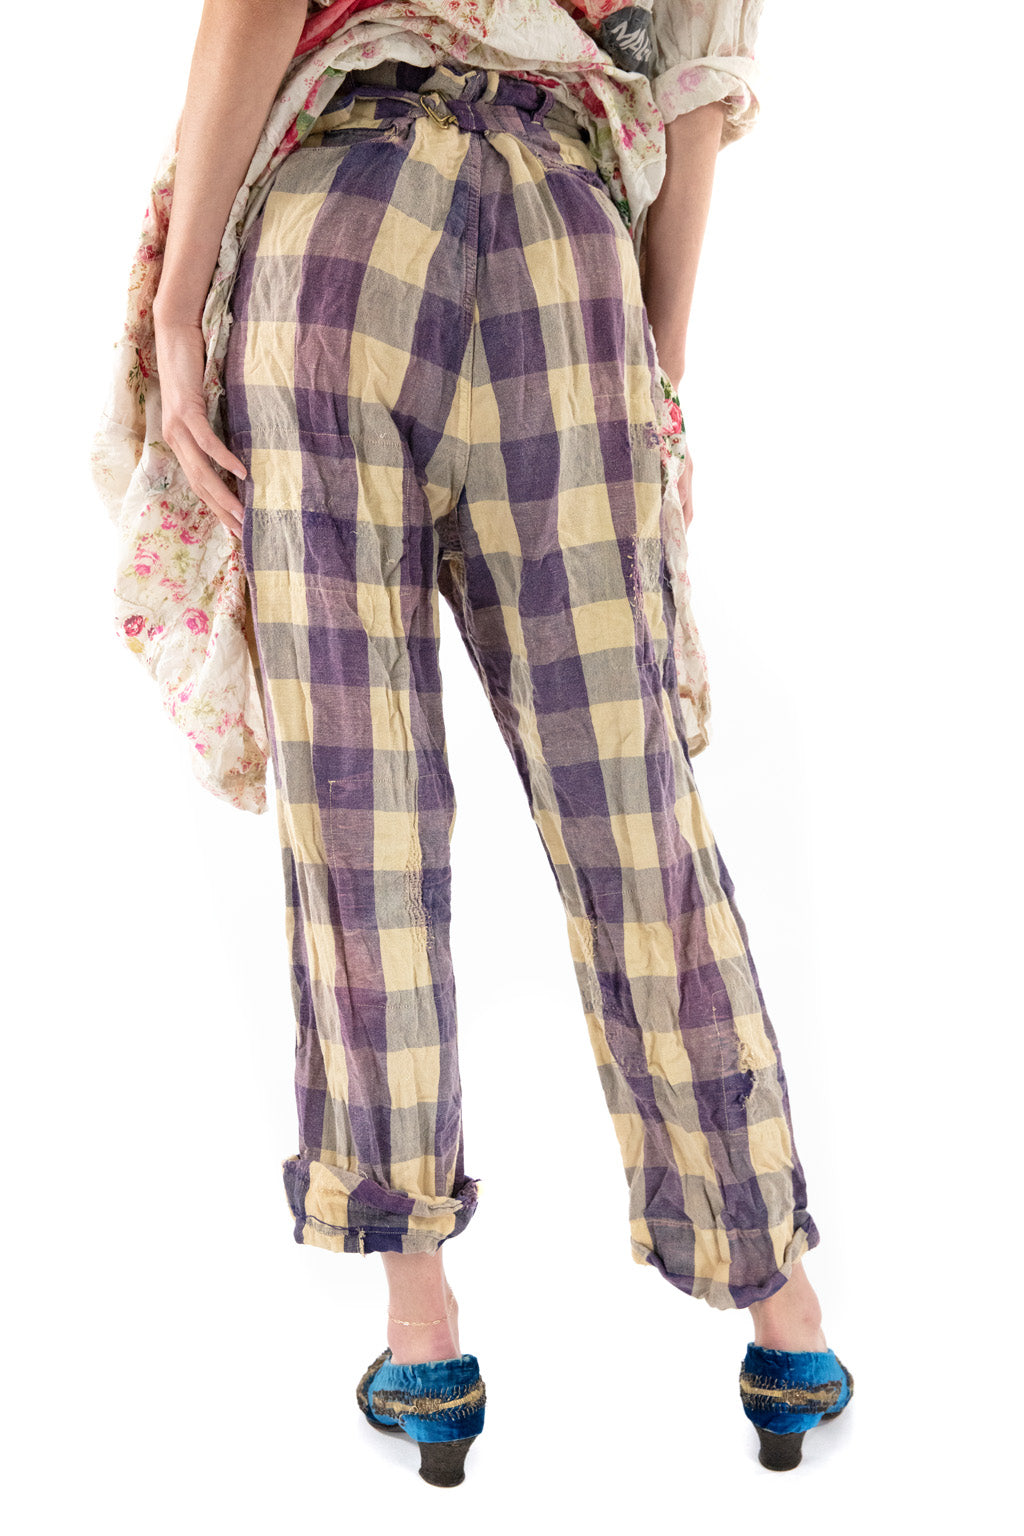 CHARMIE TROUSERS - Kingfisher Road - Online Boutique